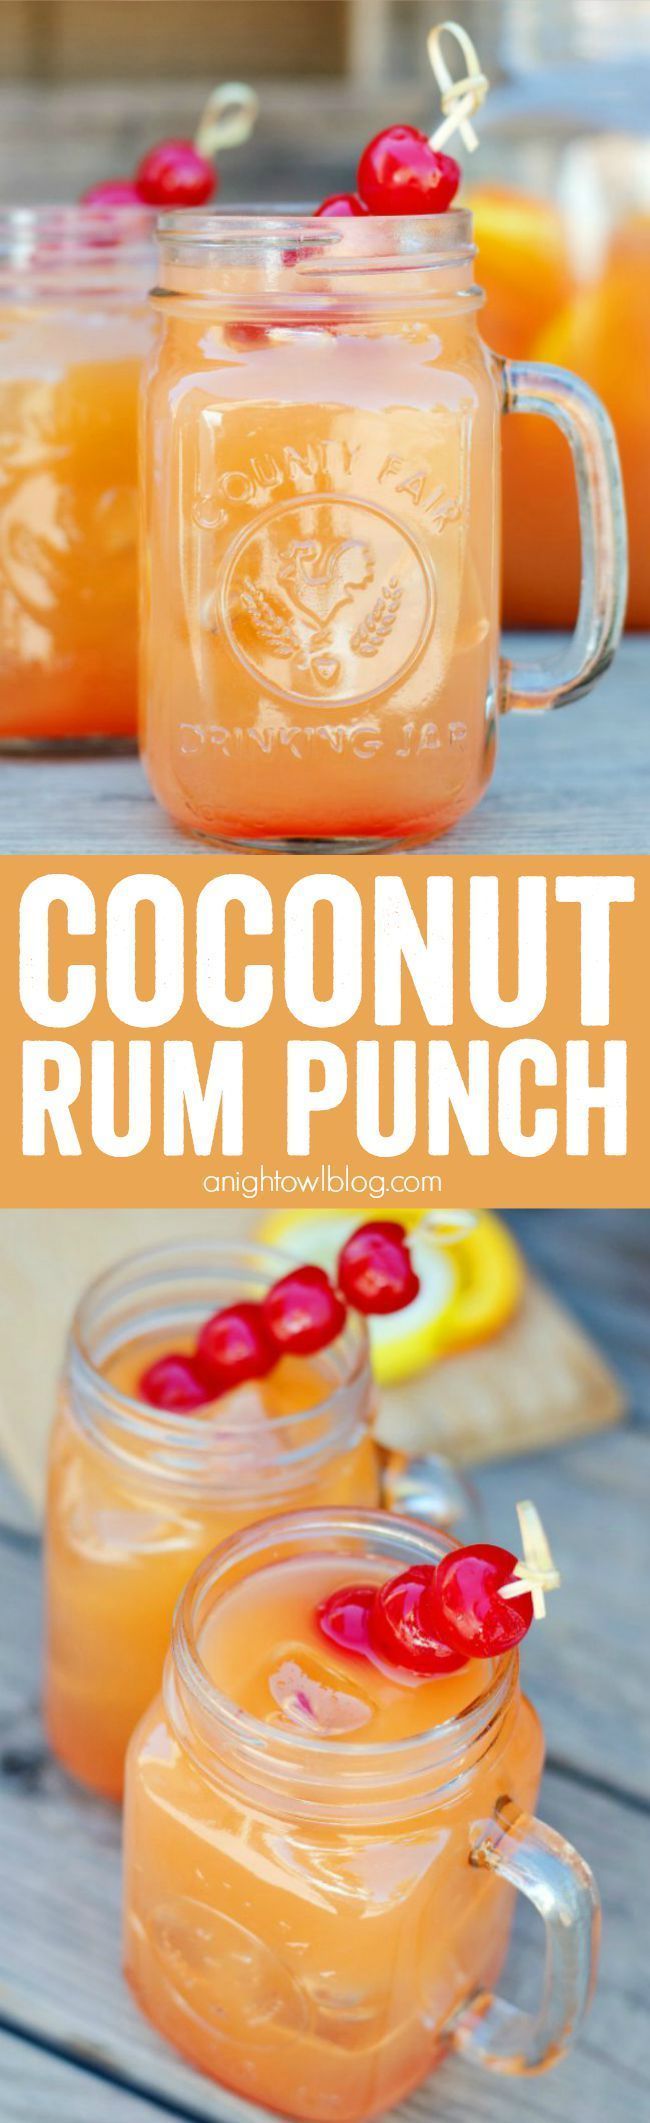 Coconut Rum Punch Recipe – a delicious combination of tropical flavors and coconut rum to make one tasty party drink!